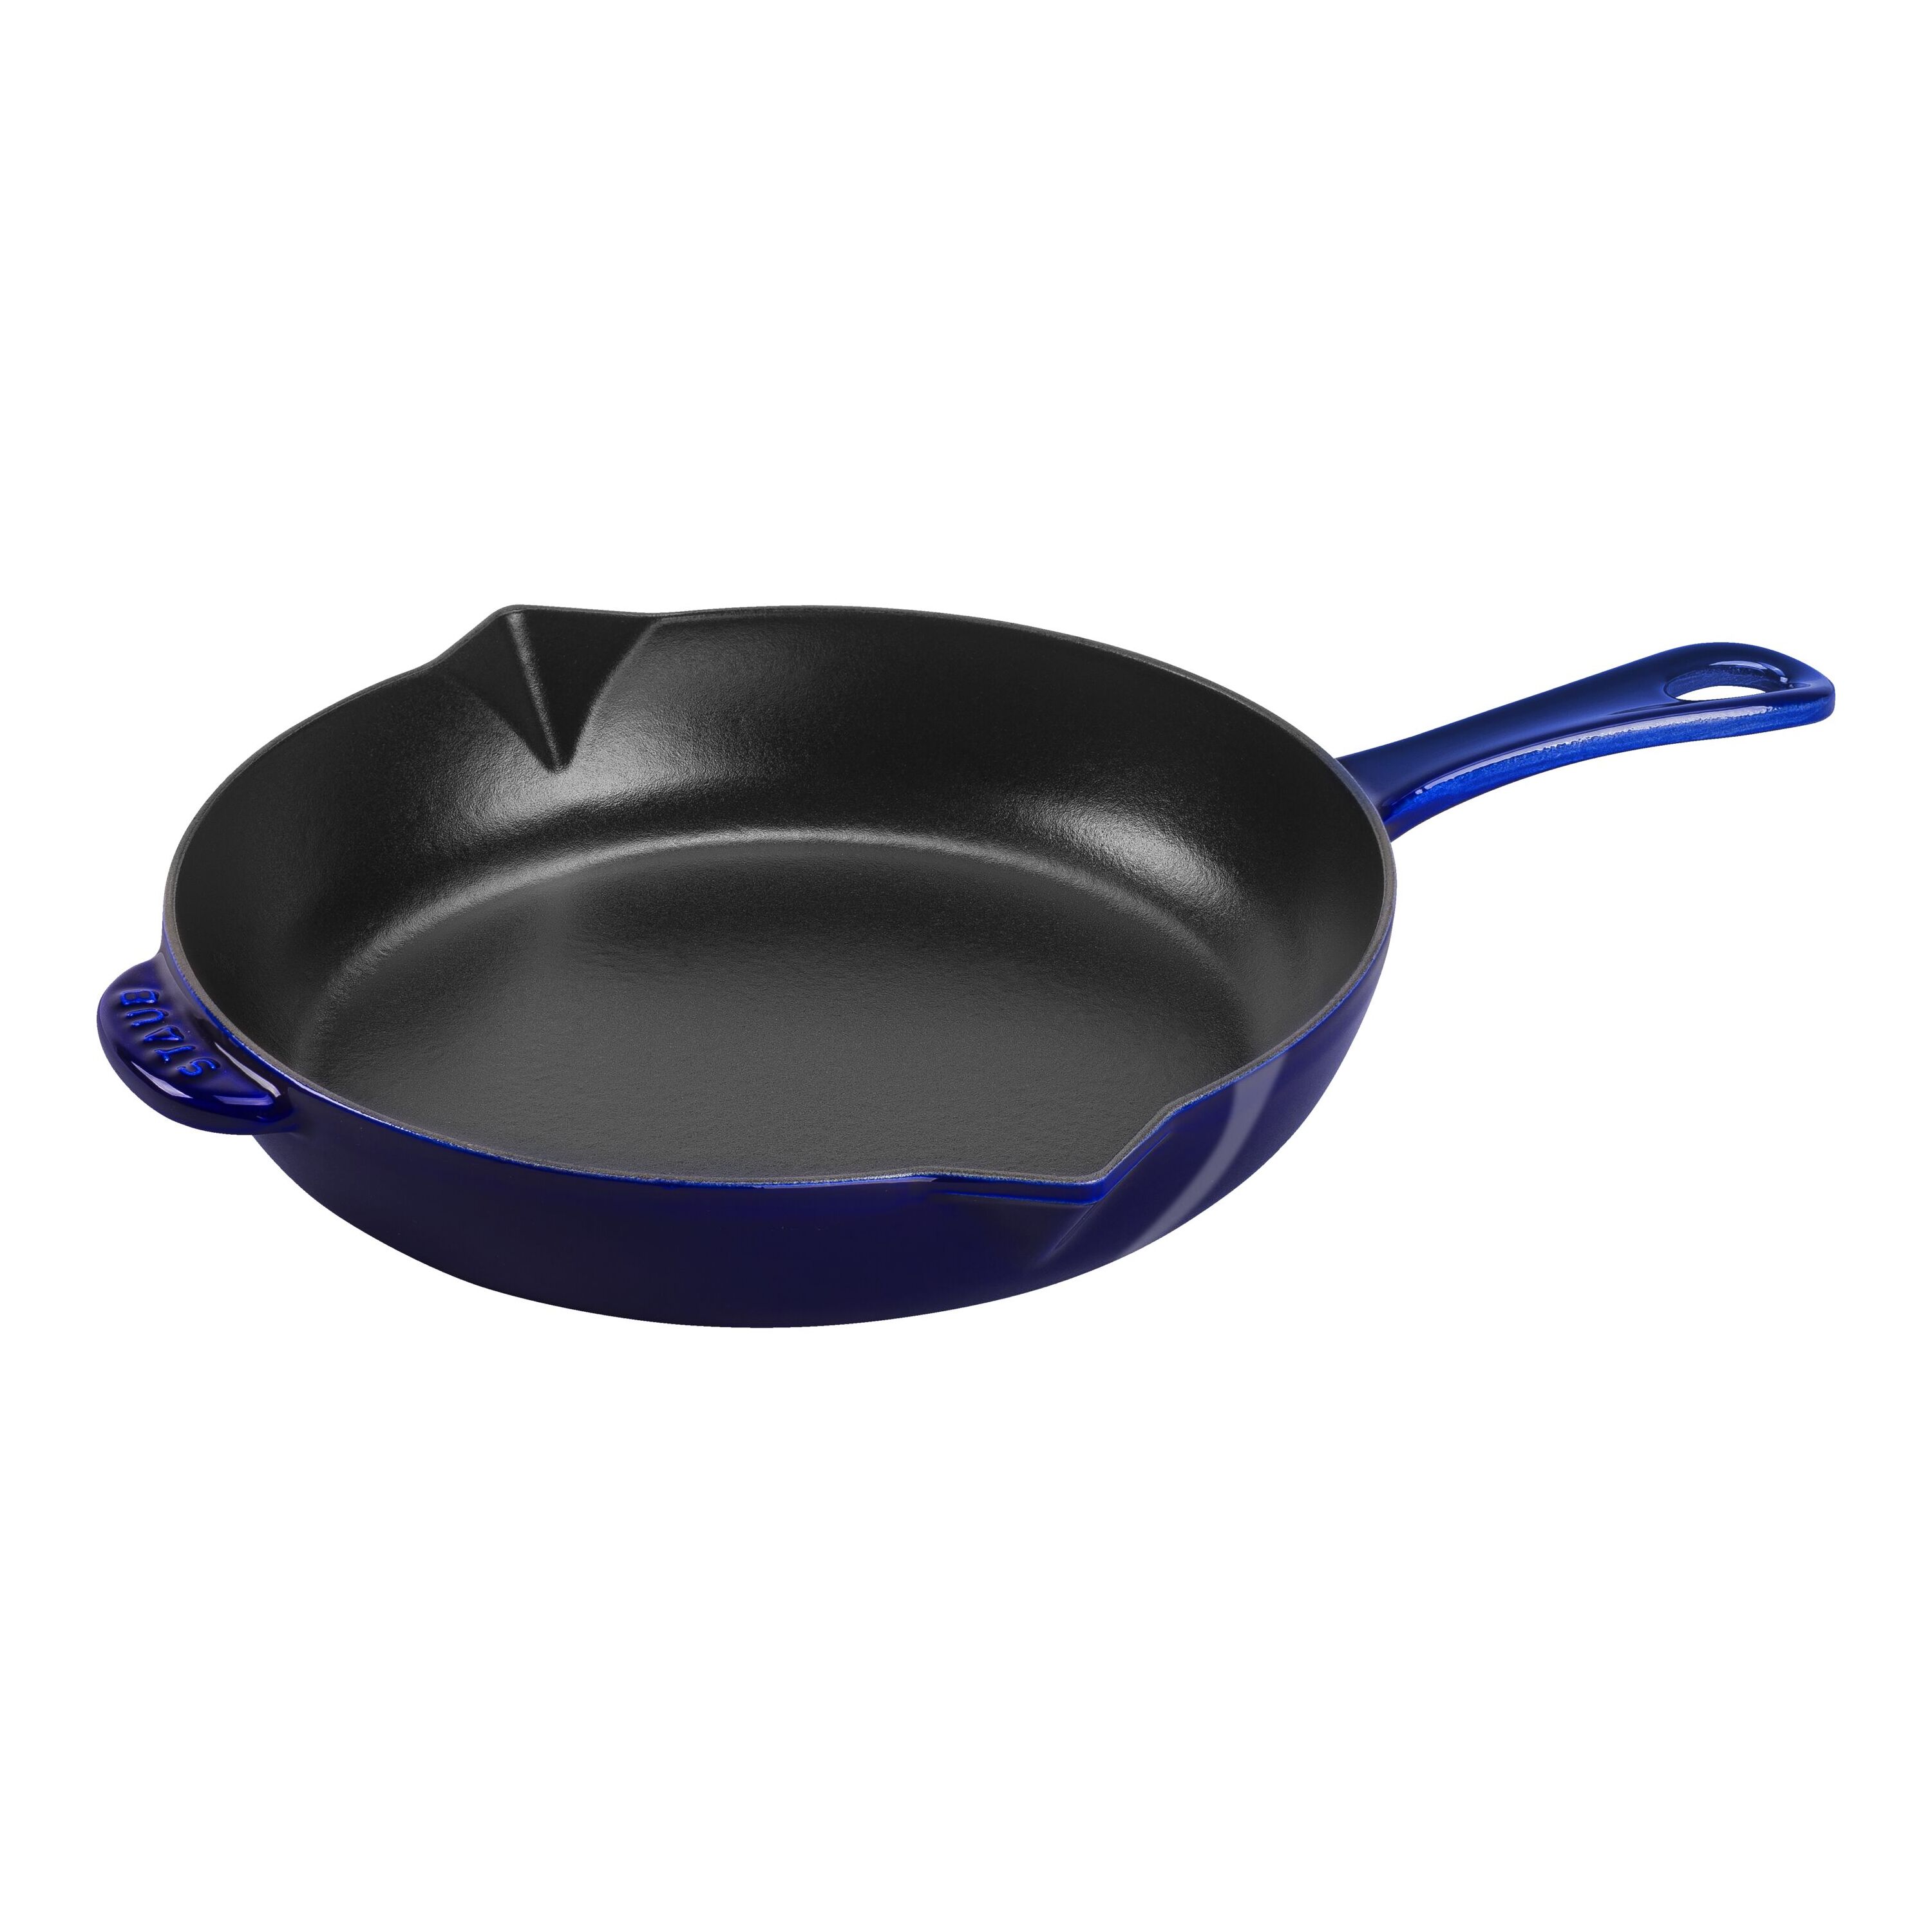 Sapphire Non-stick Flat Frying Pan For Pancakes, Steak, Eggs, Compatible  With Induction Cooker, Cookware, Nonstick Pan, Skillet